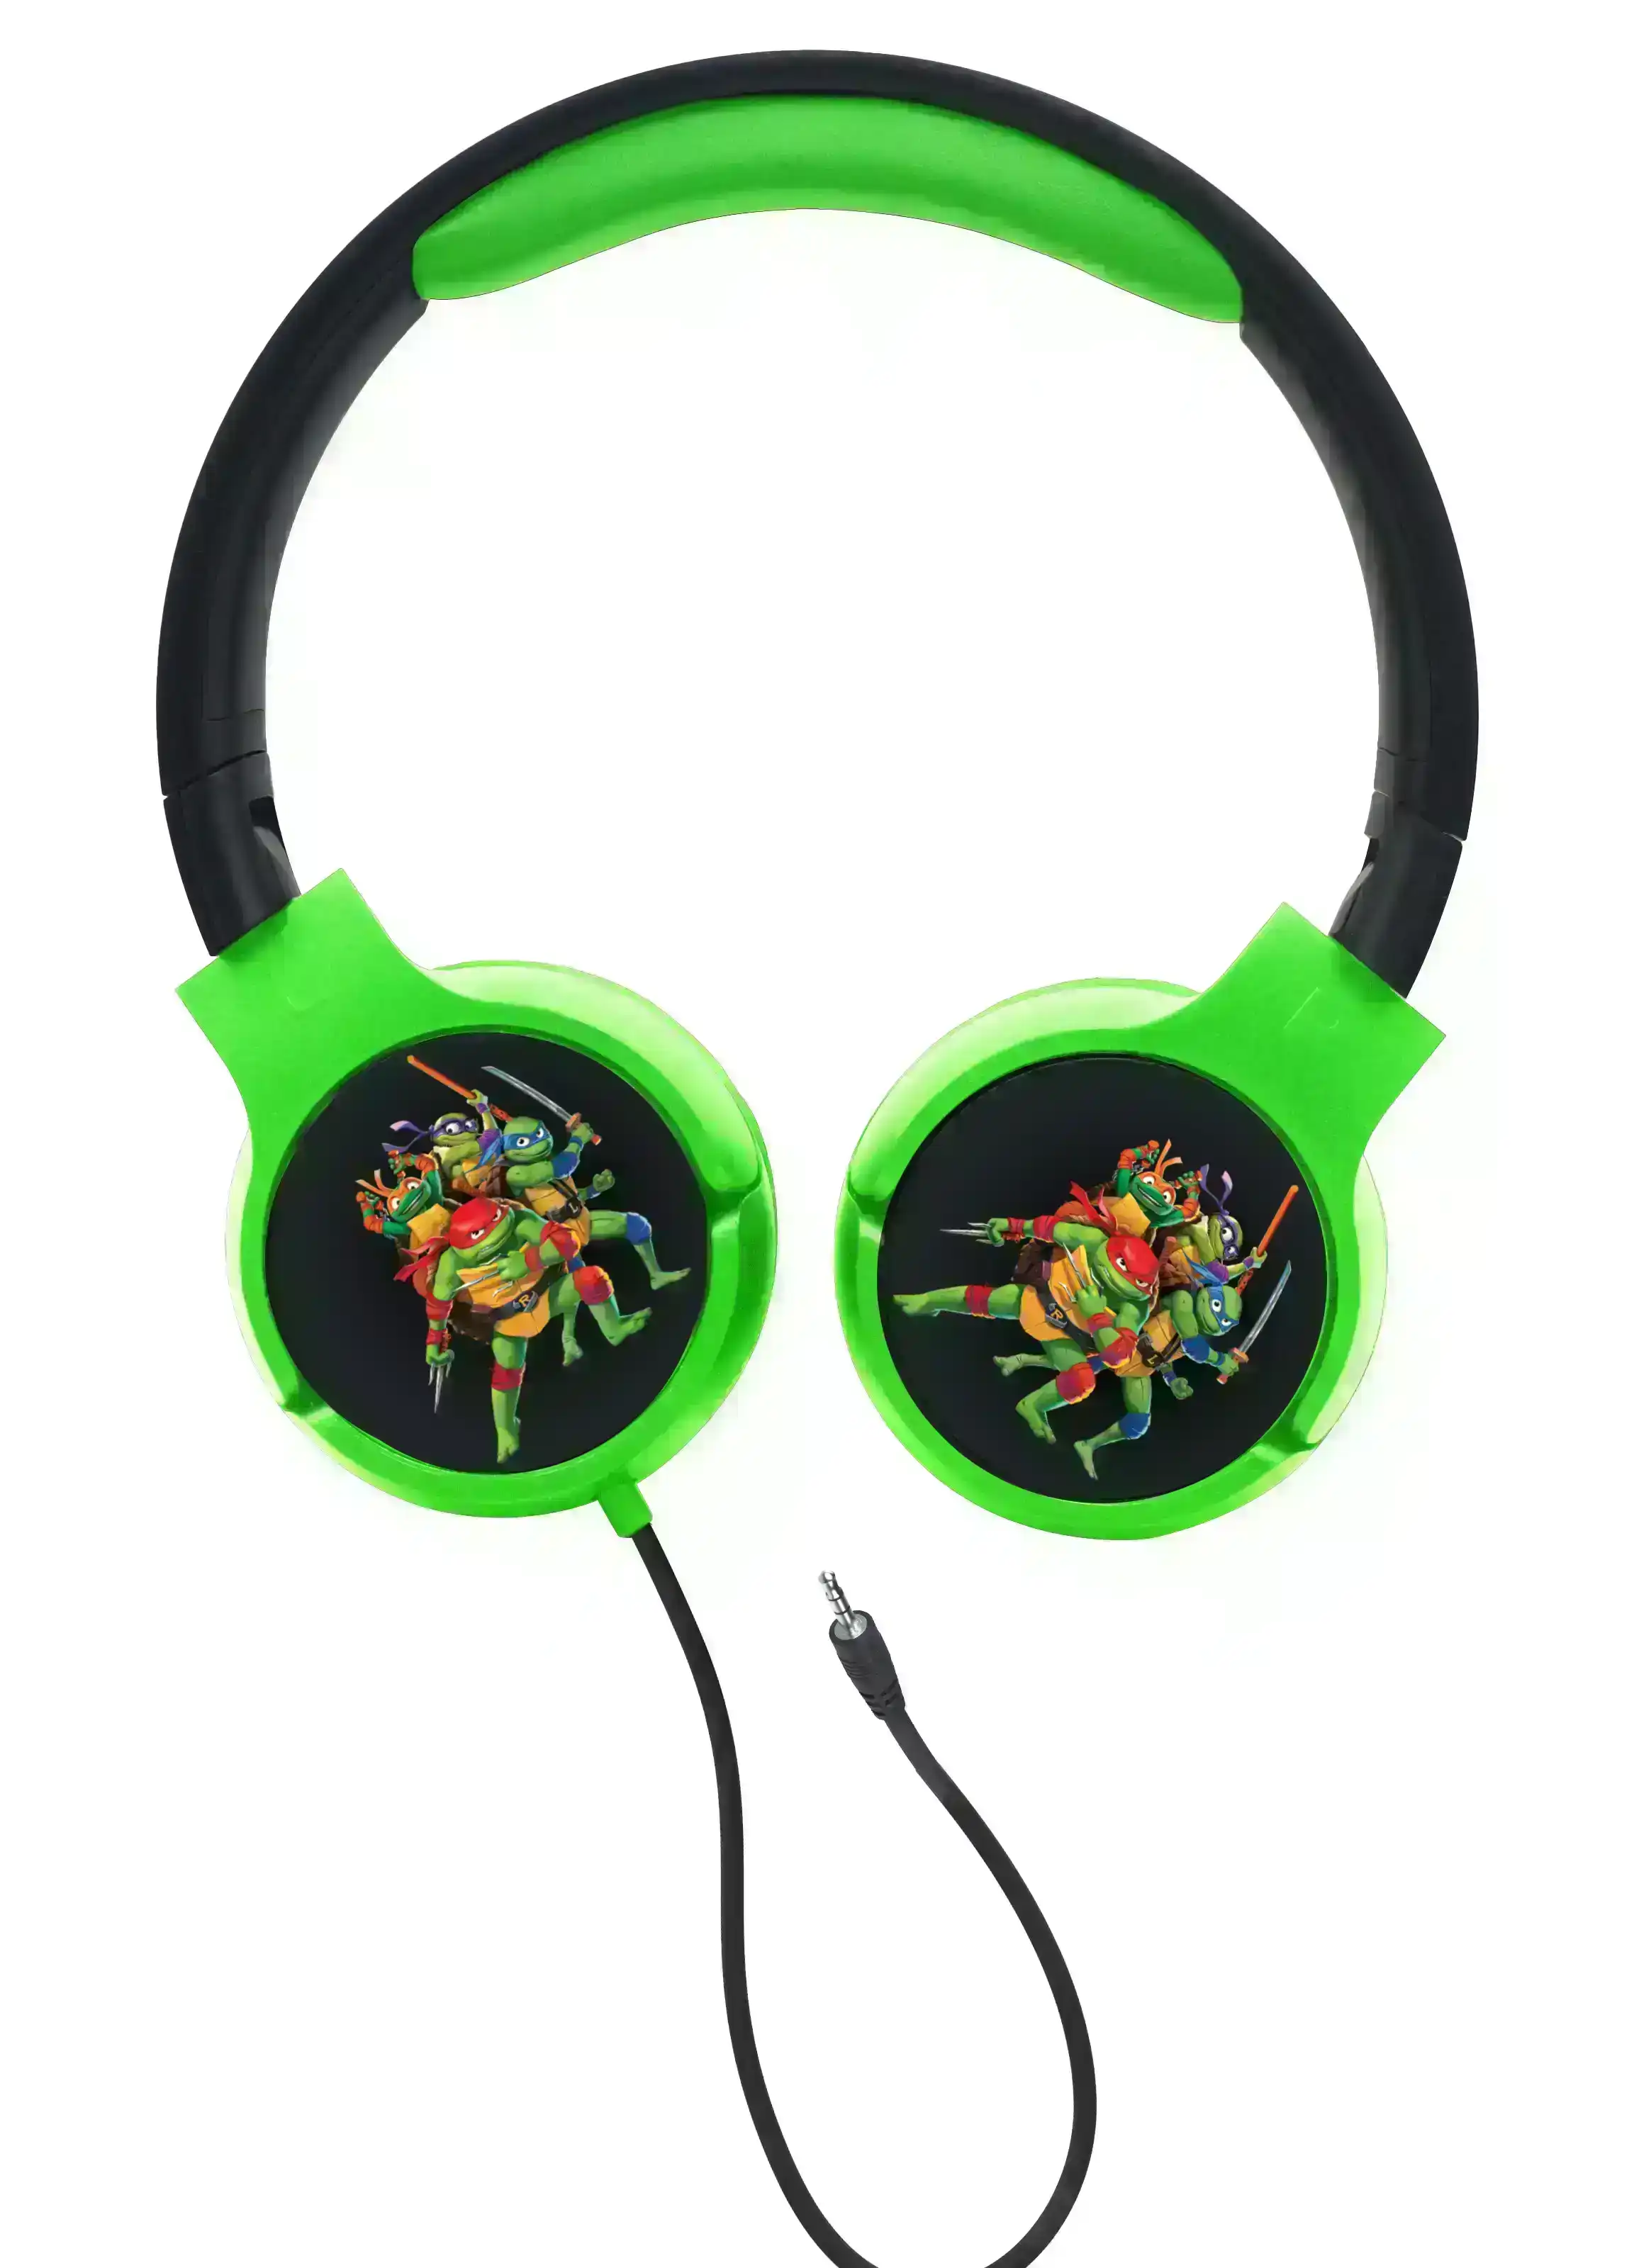 TMNT Wired Kids Foldable Headphones - Safe Audio for Young Ninja Turtles Fans